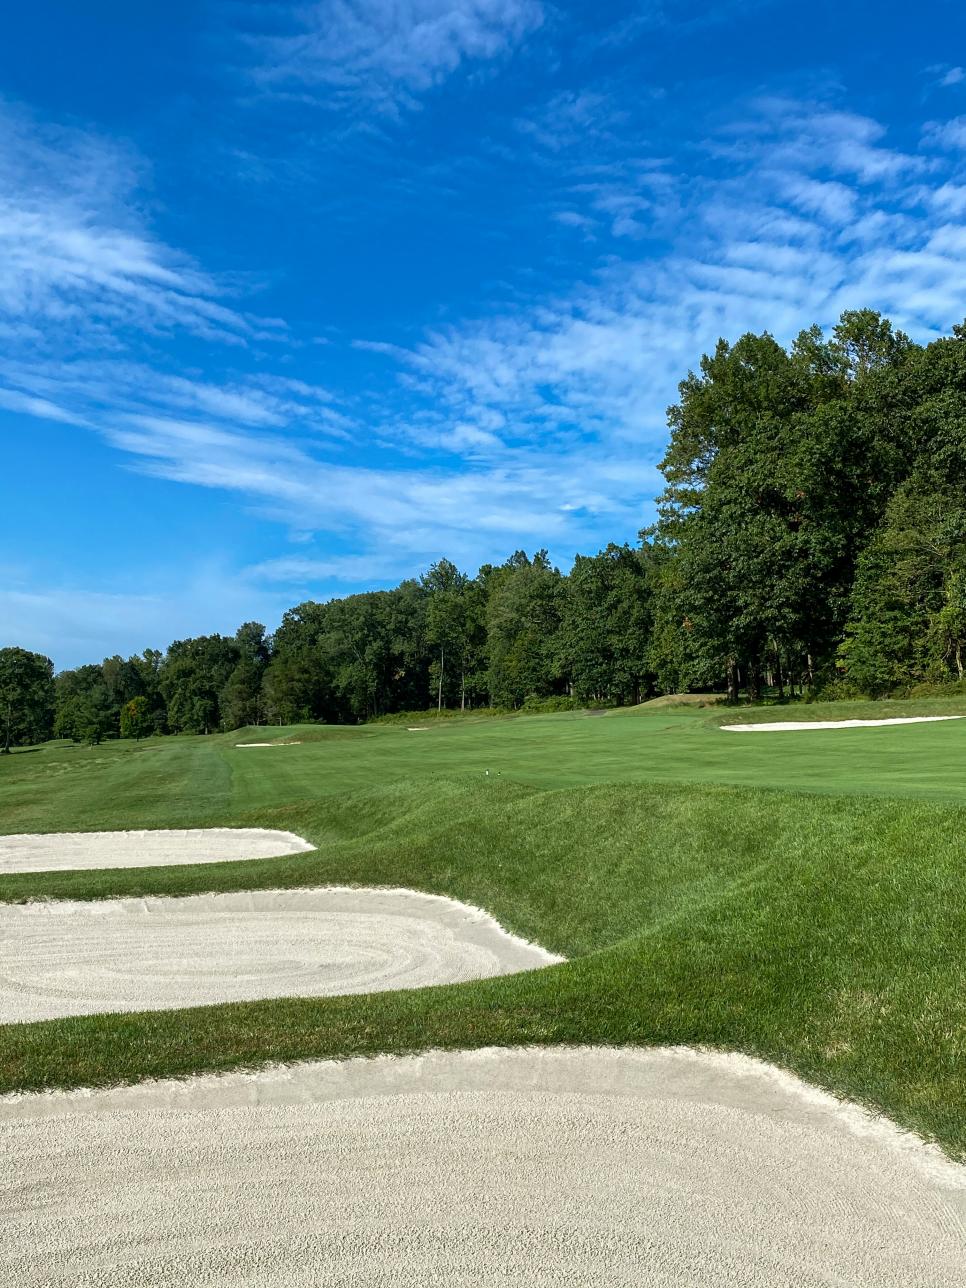 /content/dam/images/golfdigest/fullset/course-photos-for-places-to-play/watchung-valley-three-7661.JPG